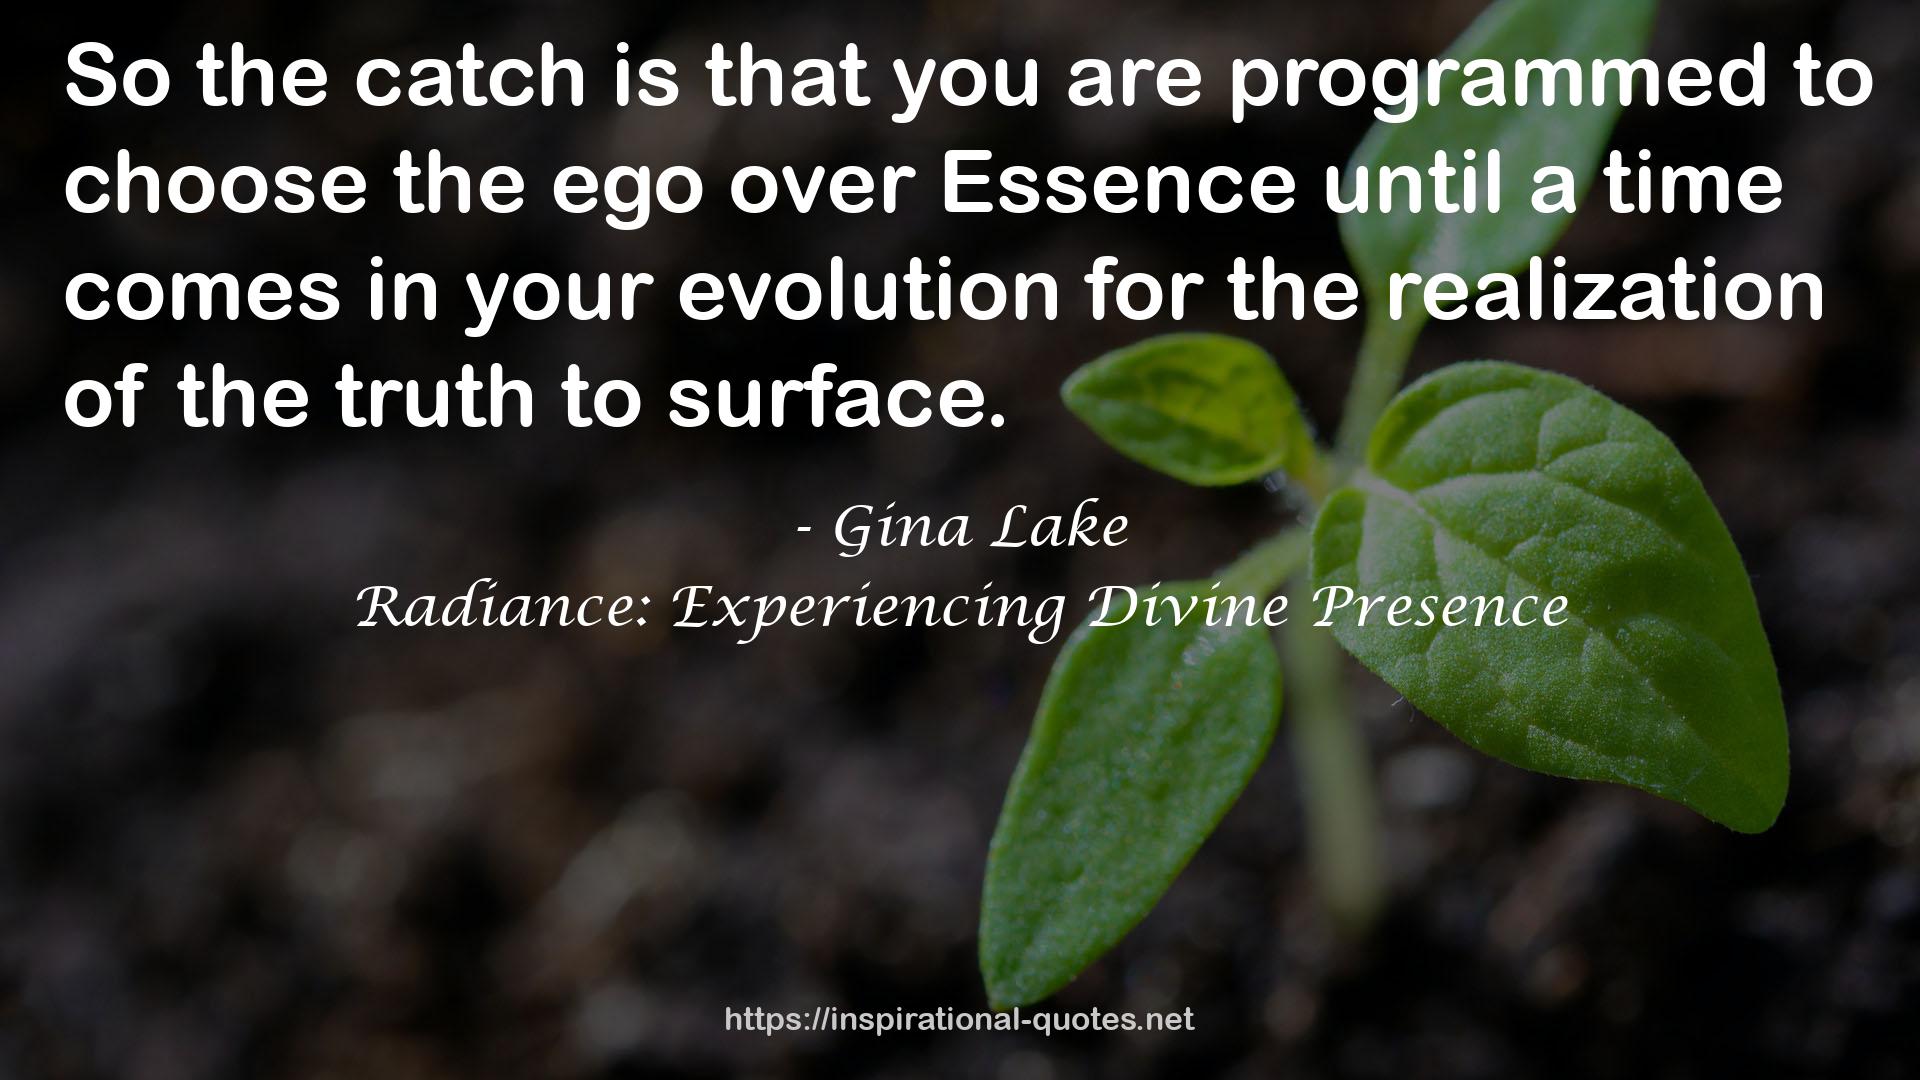 Radiance: Experiencing Divine Presence QUOTES